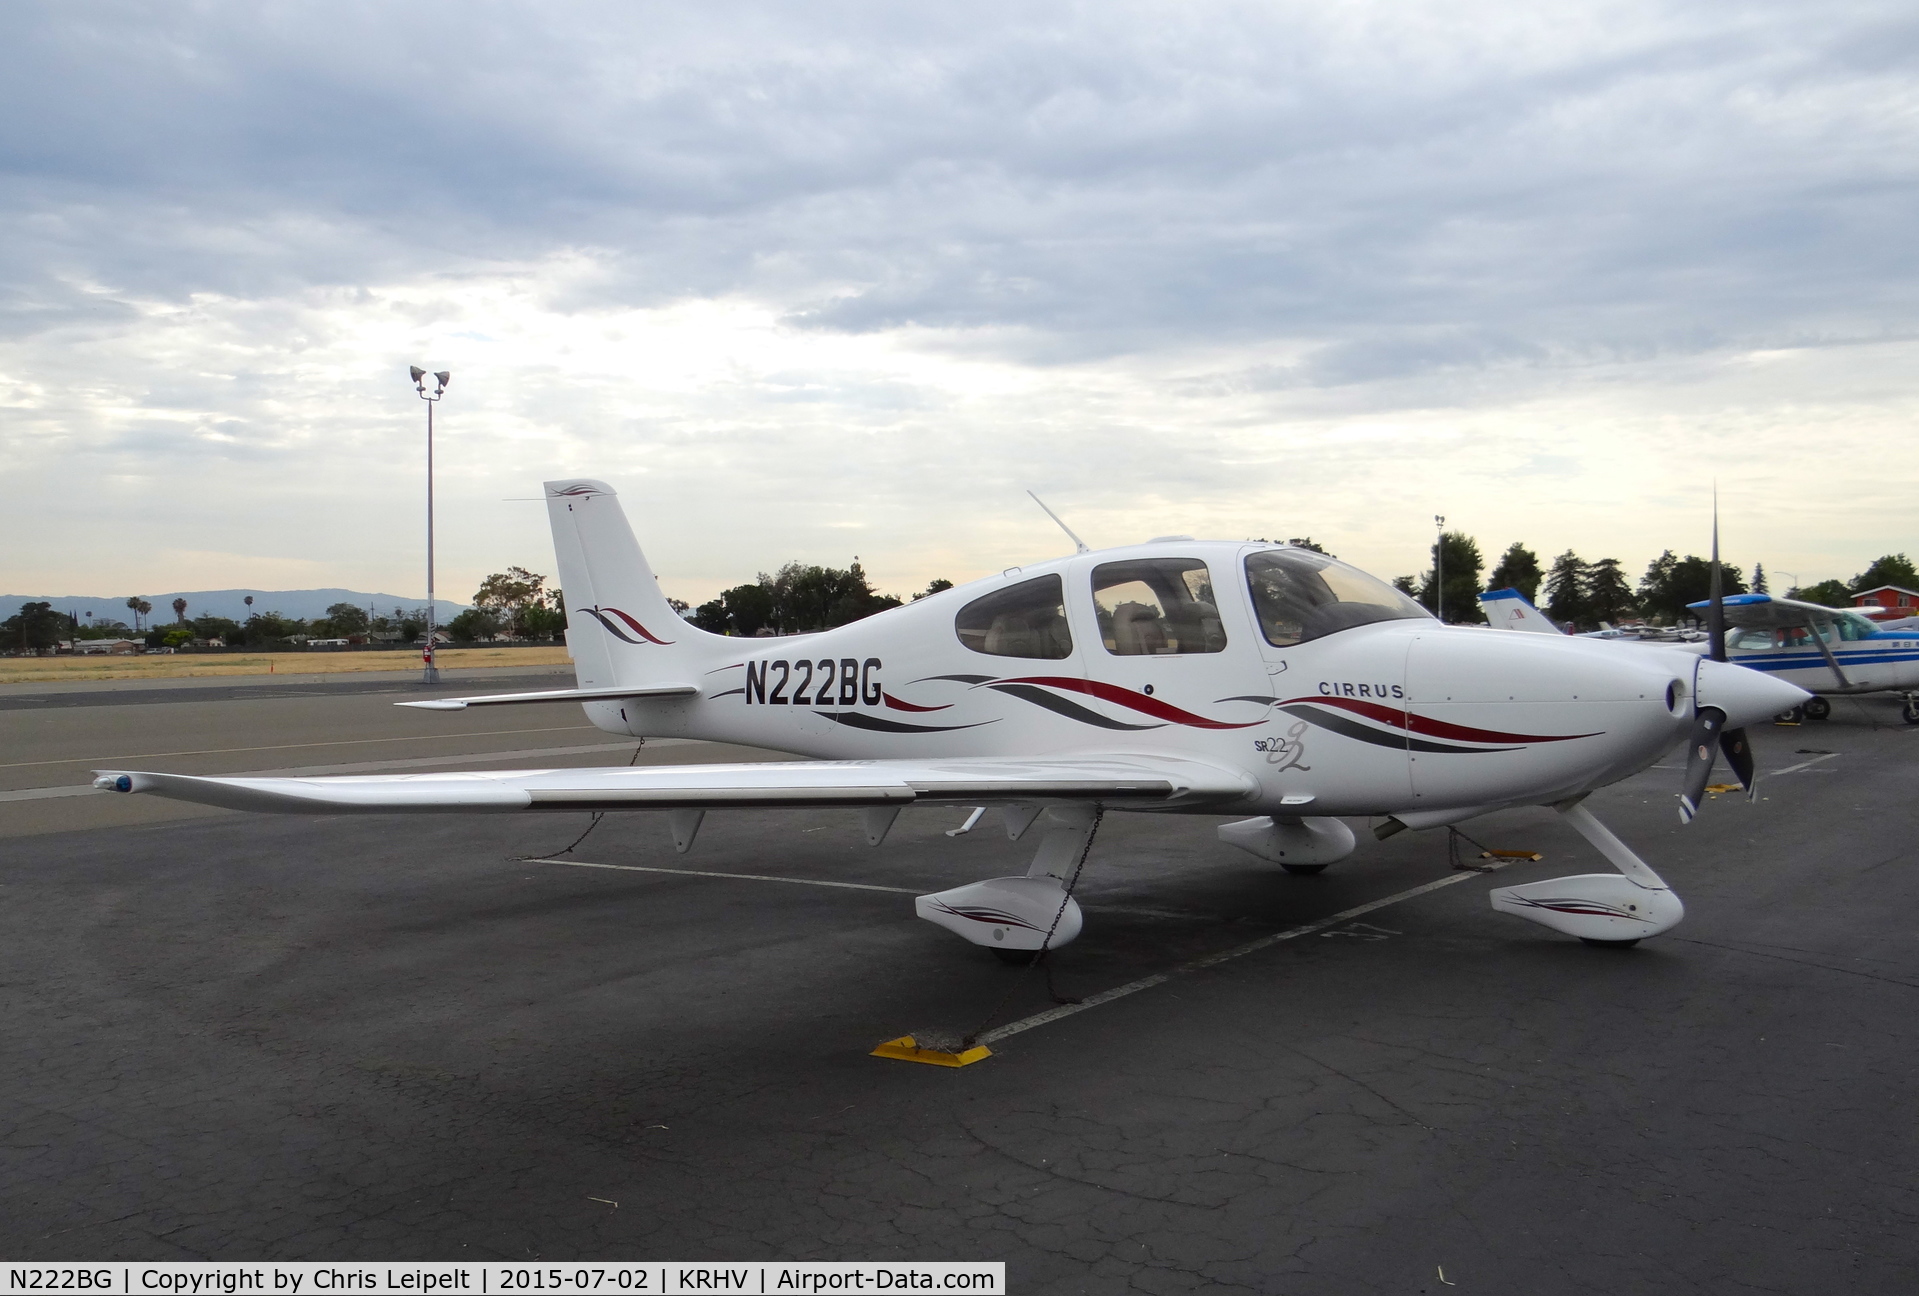 N222BG, 2004 Cirrus SR22T C/N 1095, Nevada-based 2004 Cirrus SR-22T visiting parked on the Nice Air tie downs at Reid Hillview Airport, San Jose, CA.